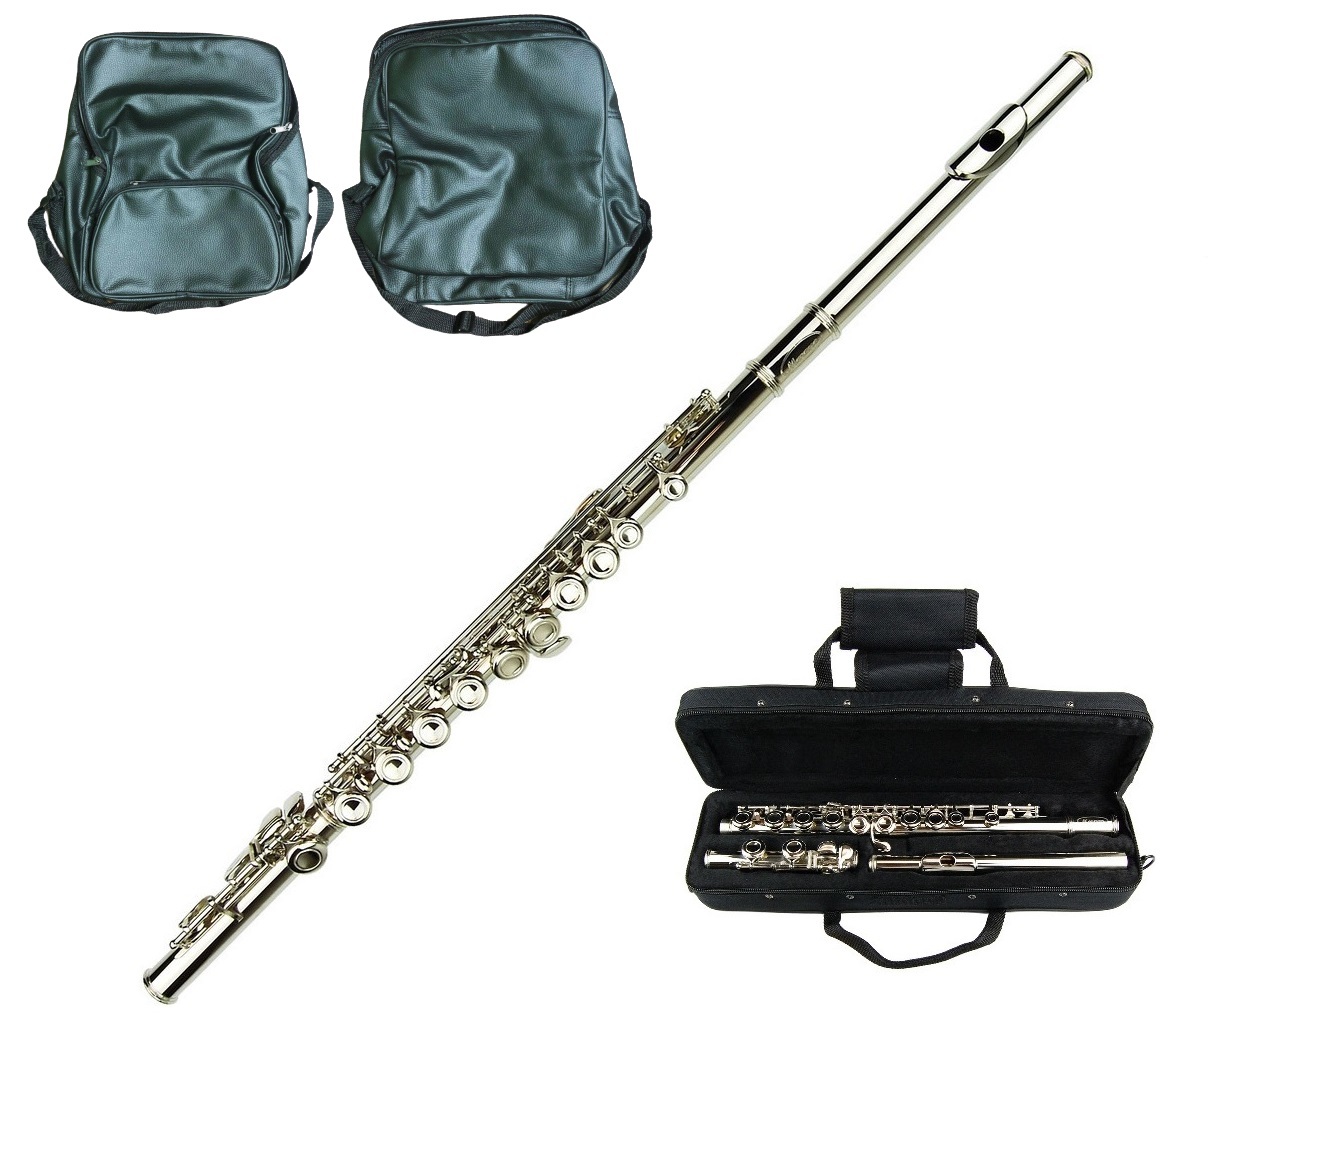 Merano Silver Flute 16 Hole, Key of C with Case+Music Sheet Bag+Accessories - $99.99